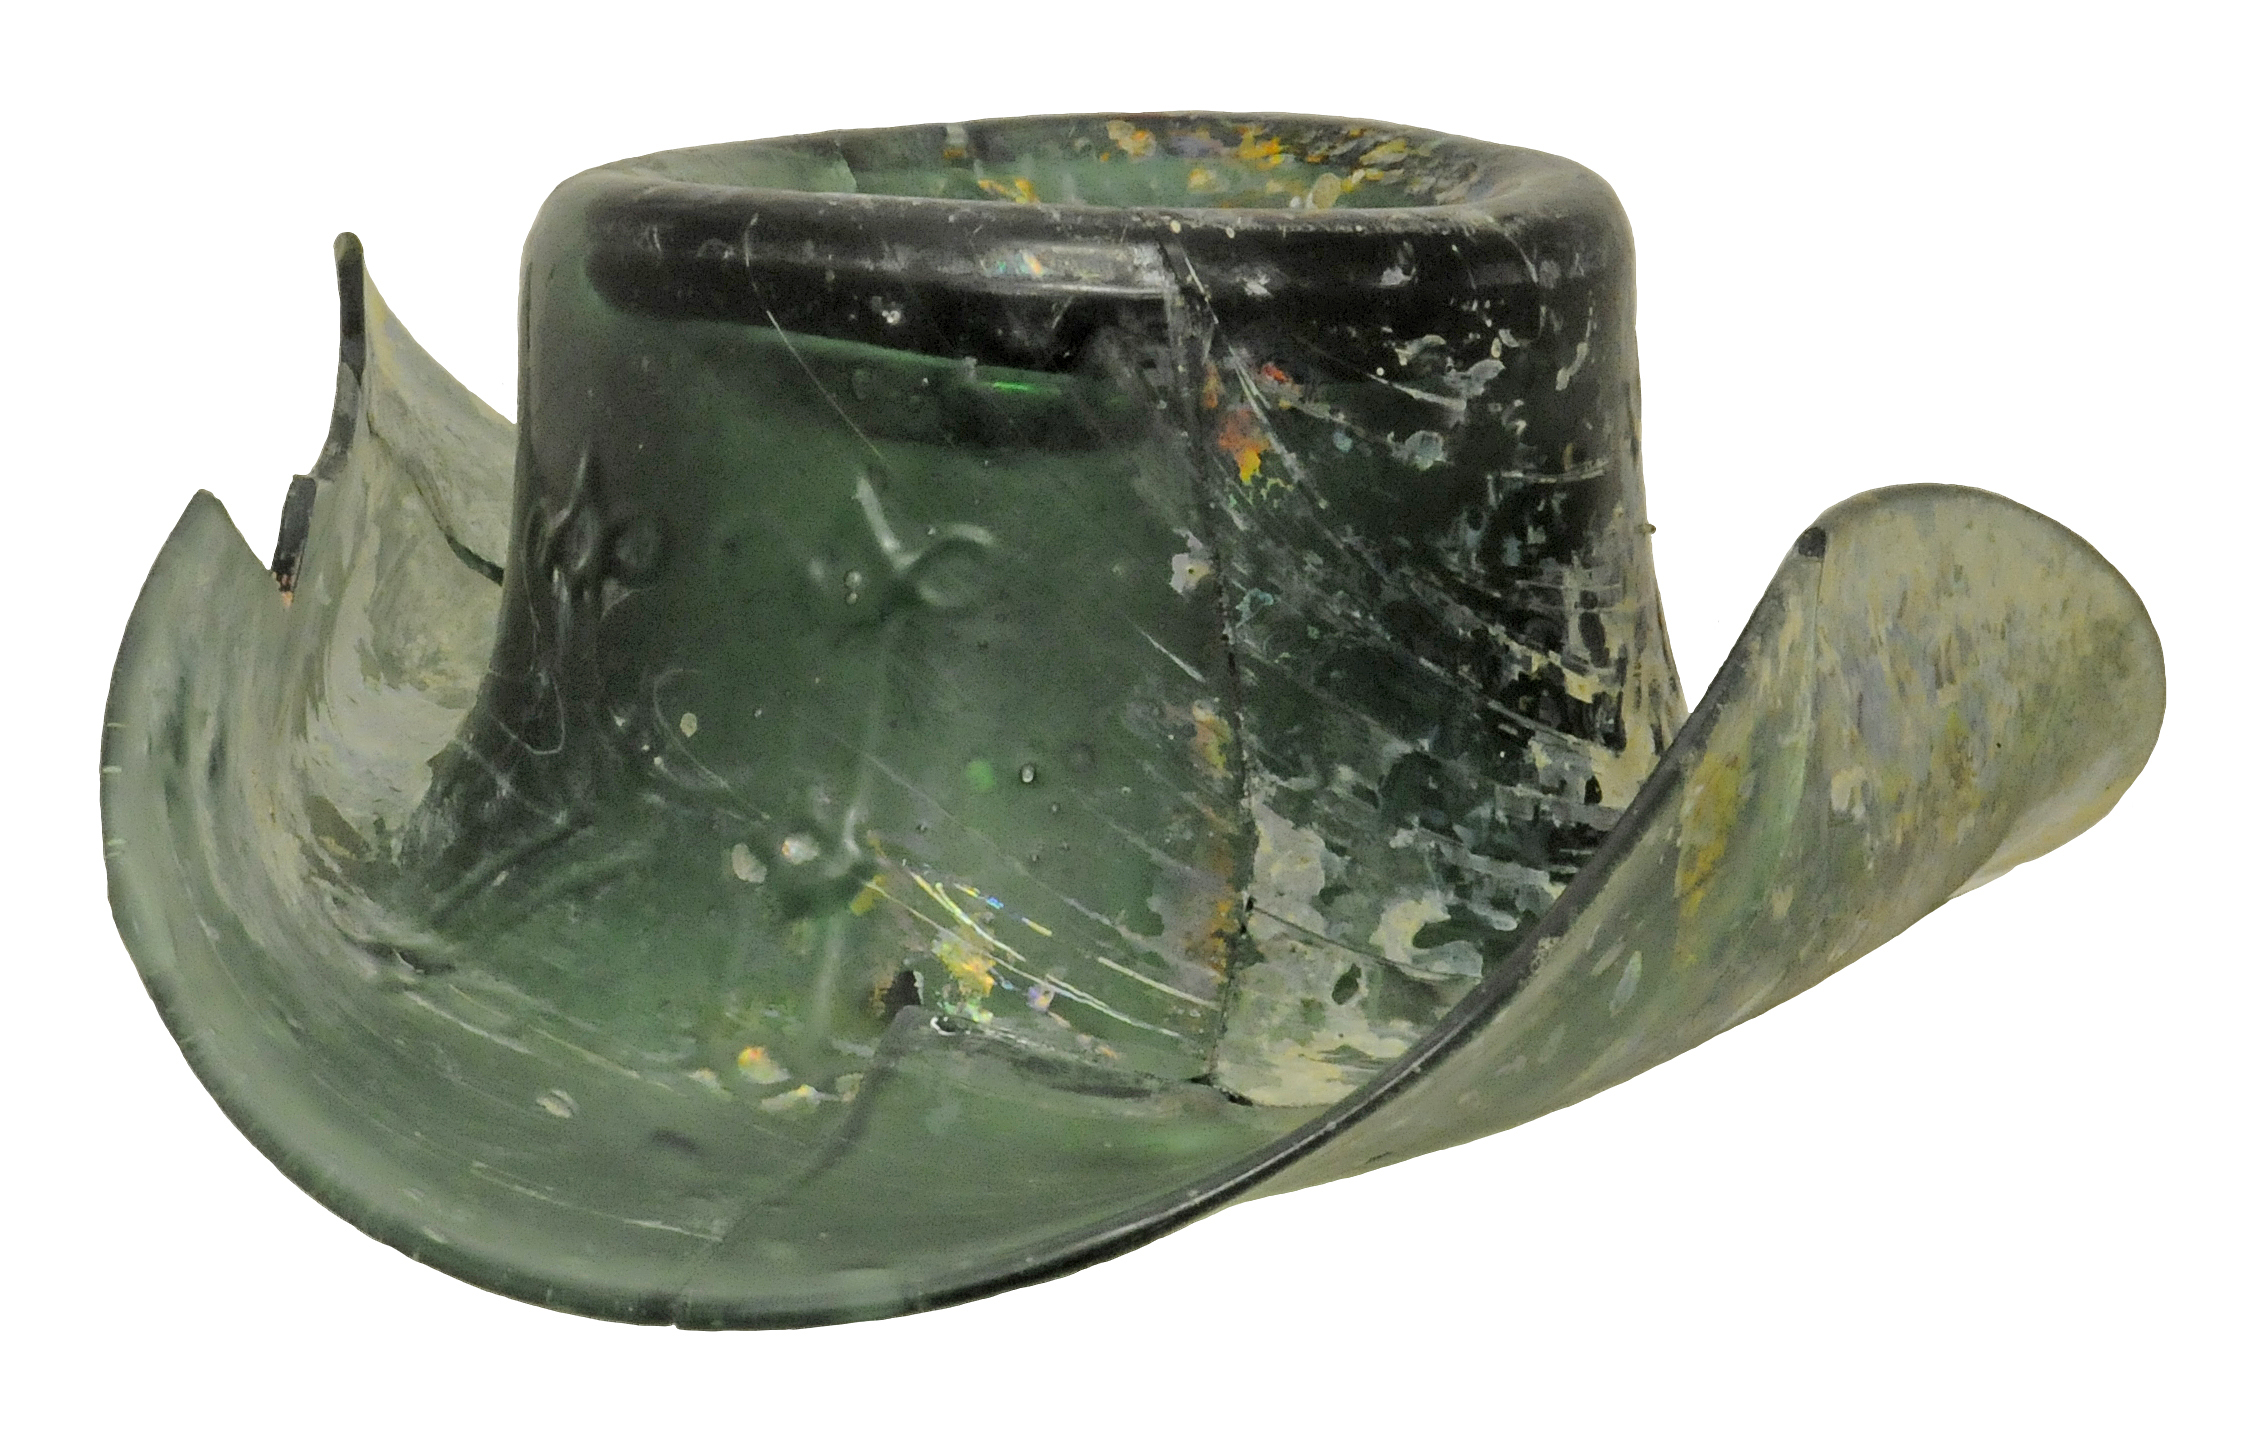 1850s glass hat made by a river wards glassmaker